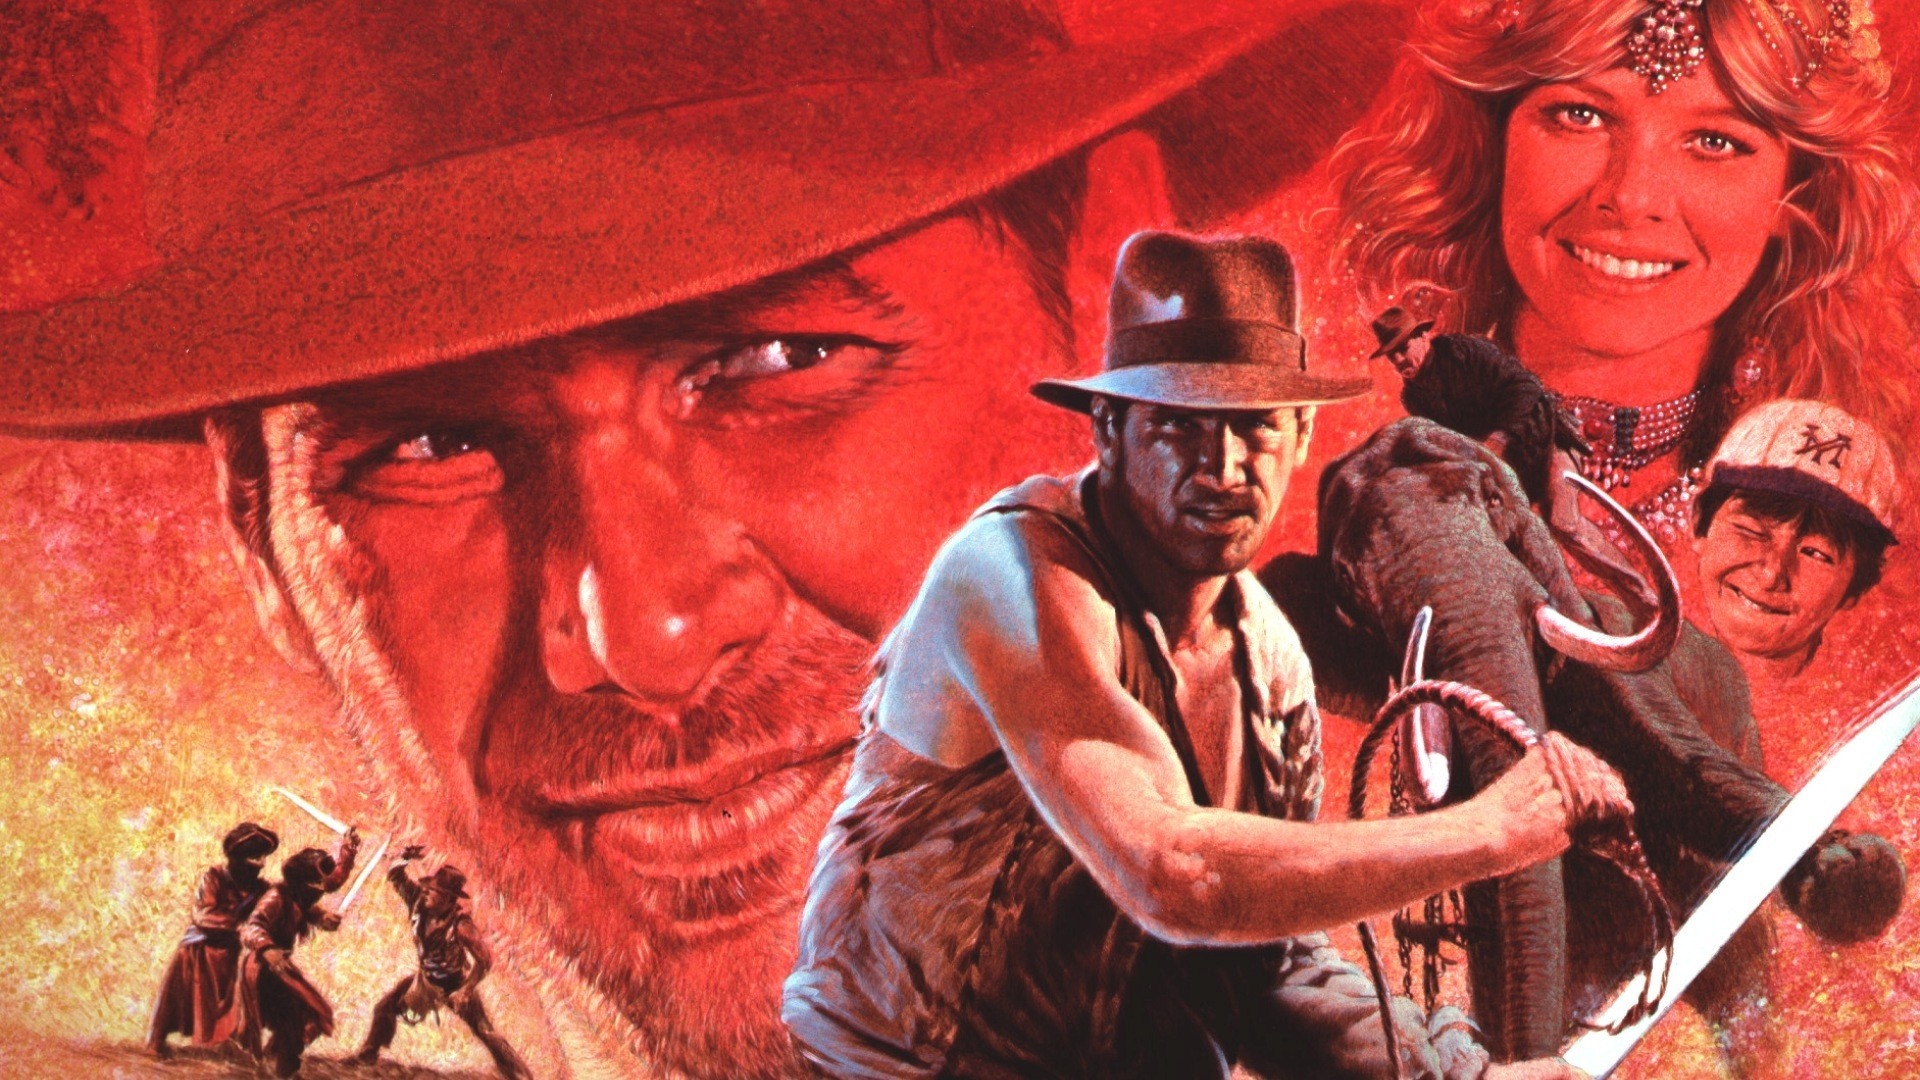 Harrison Ford (Indiana Jones): Ford's role as the title character, The Temple Of Doom. 1920x1080 Full HD Wallpaper.